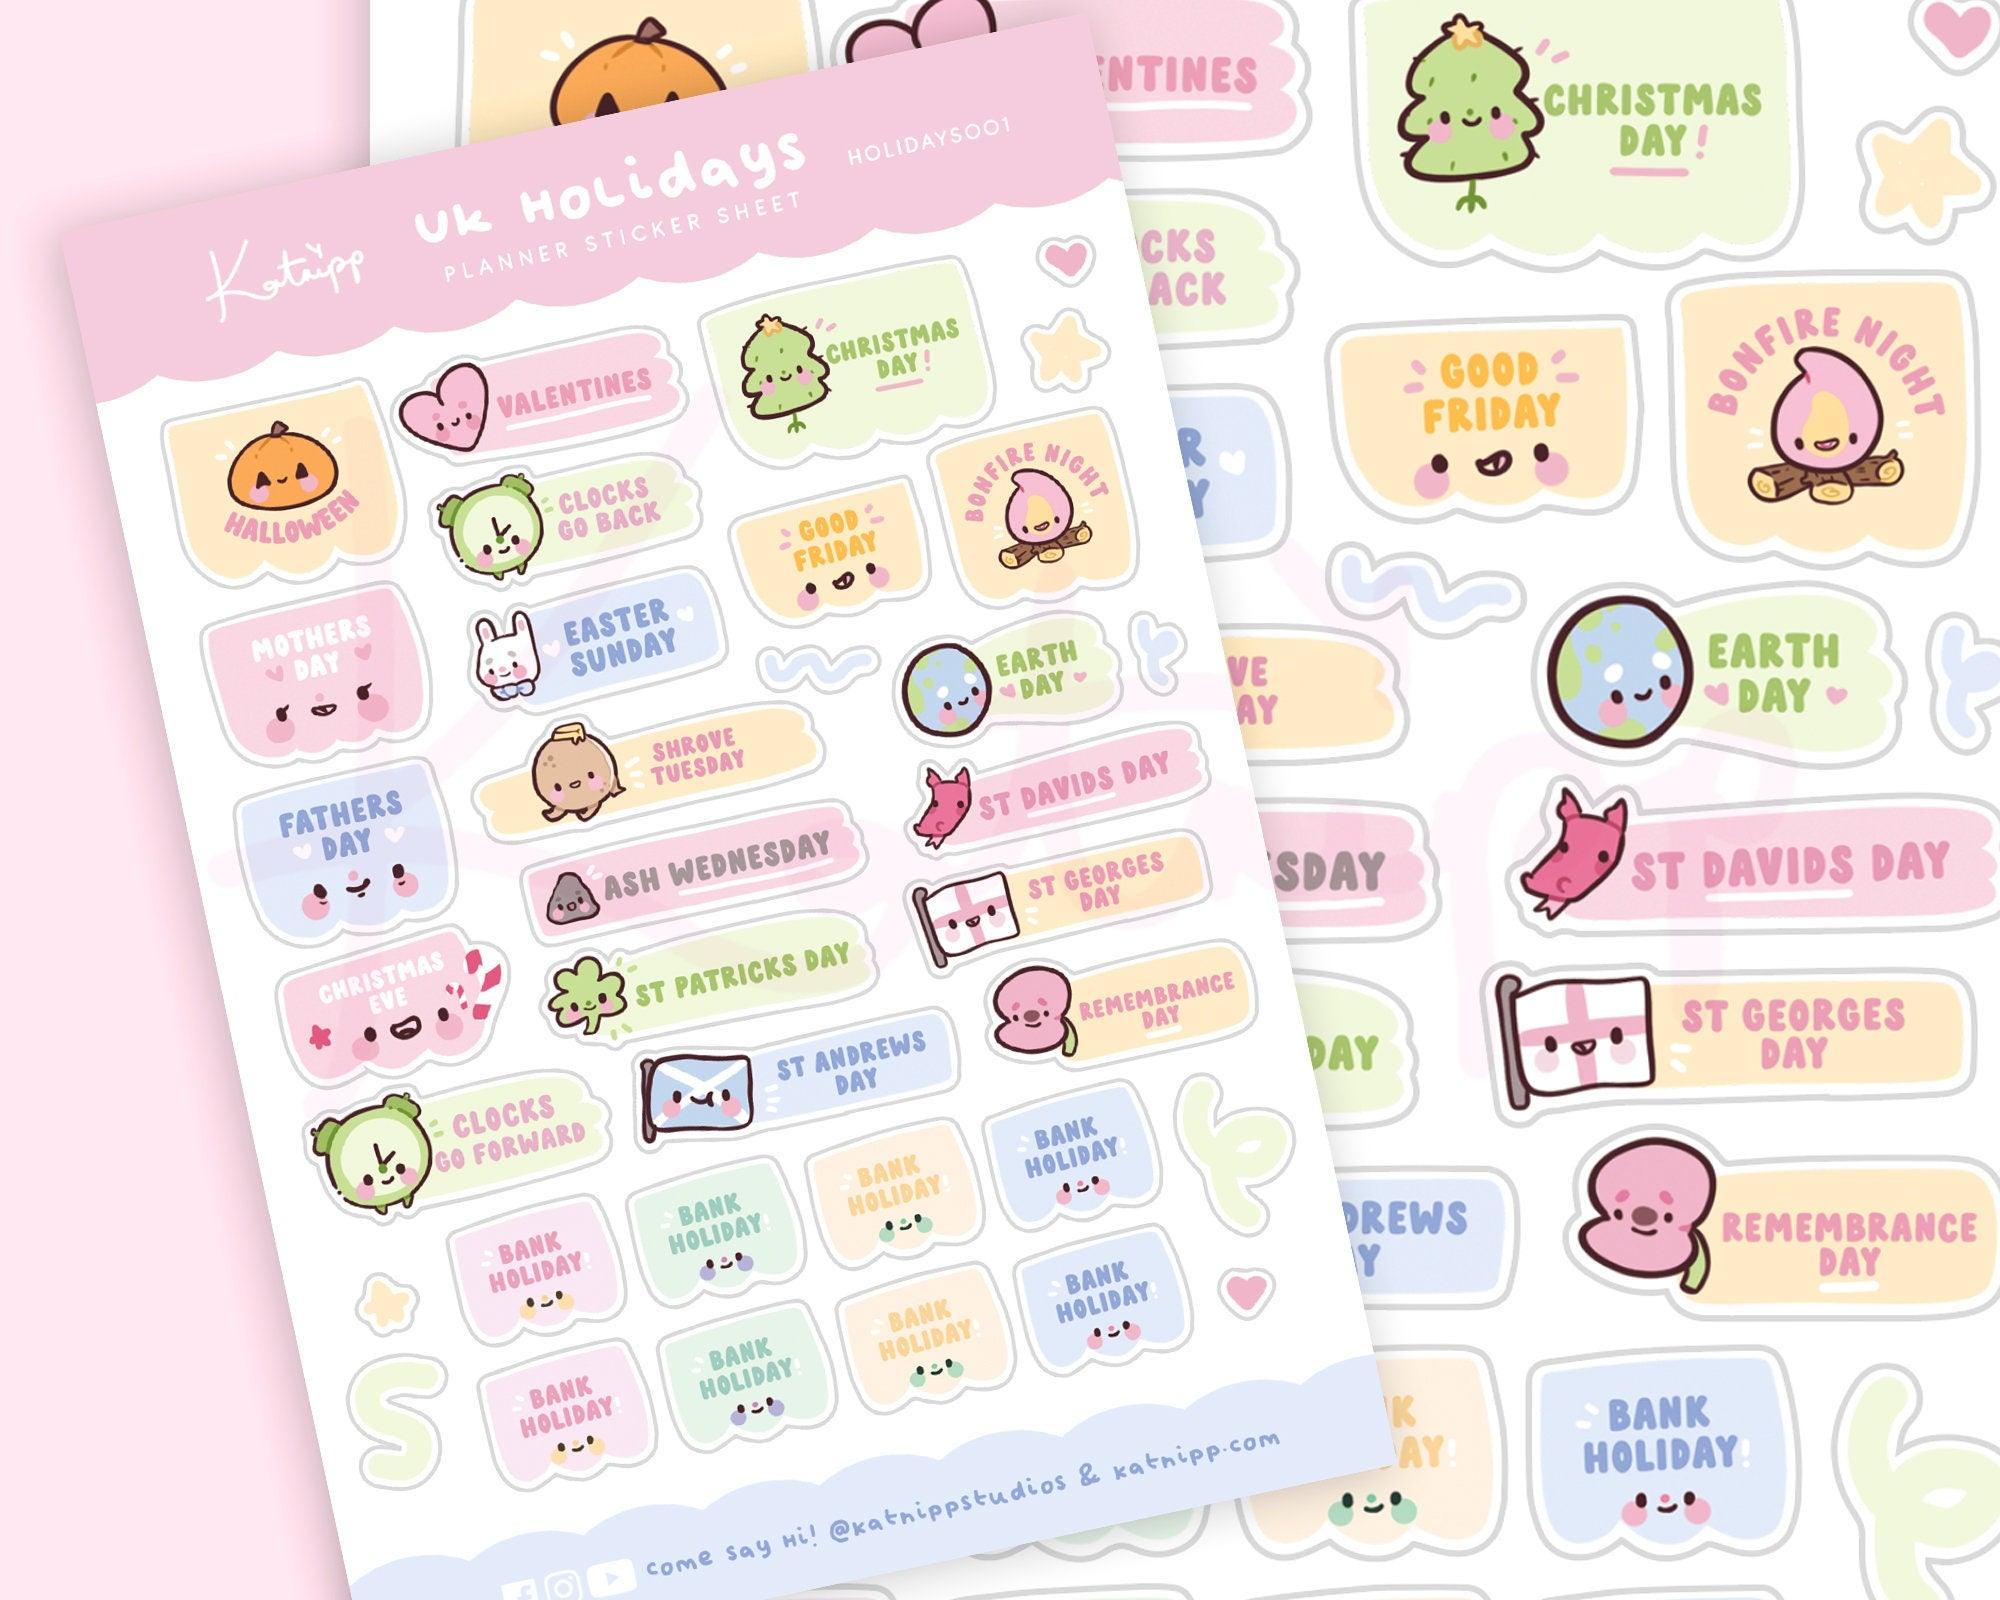 Cute Planner Stickers Collection